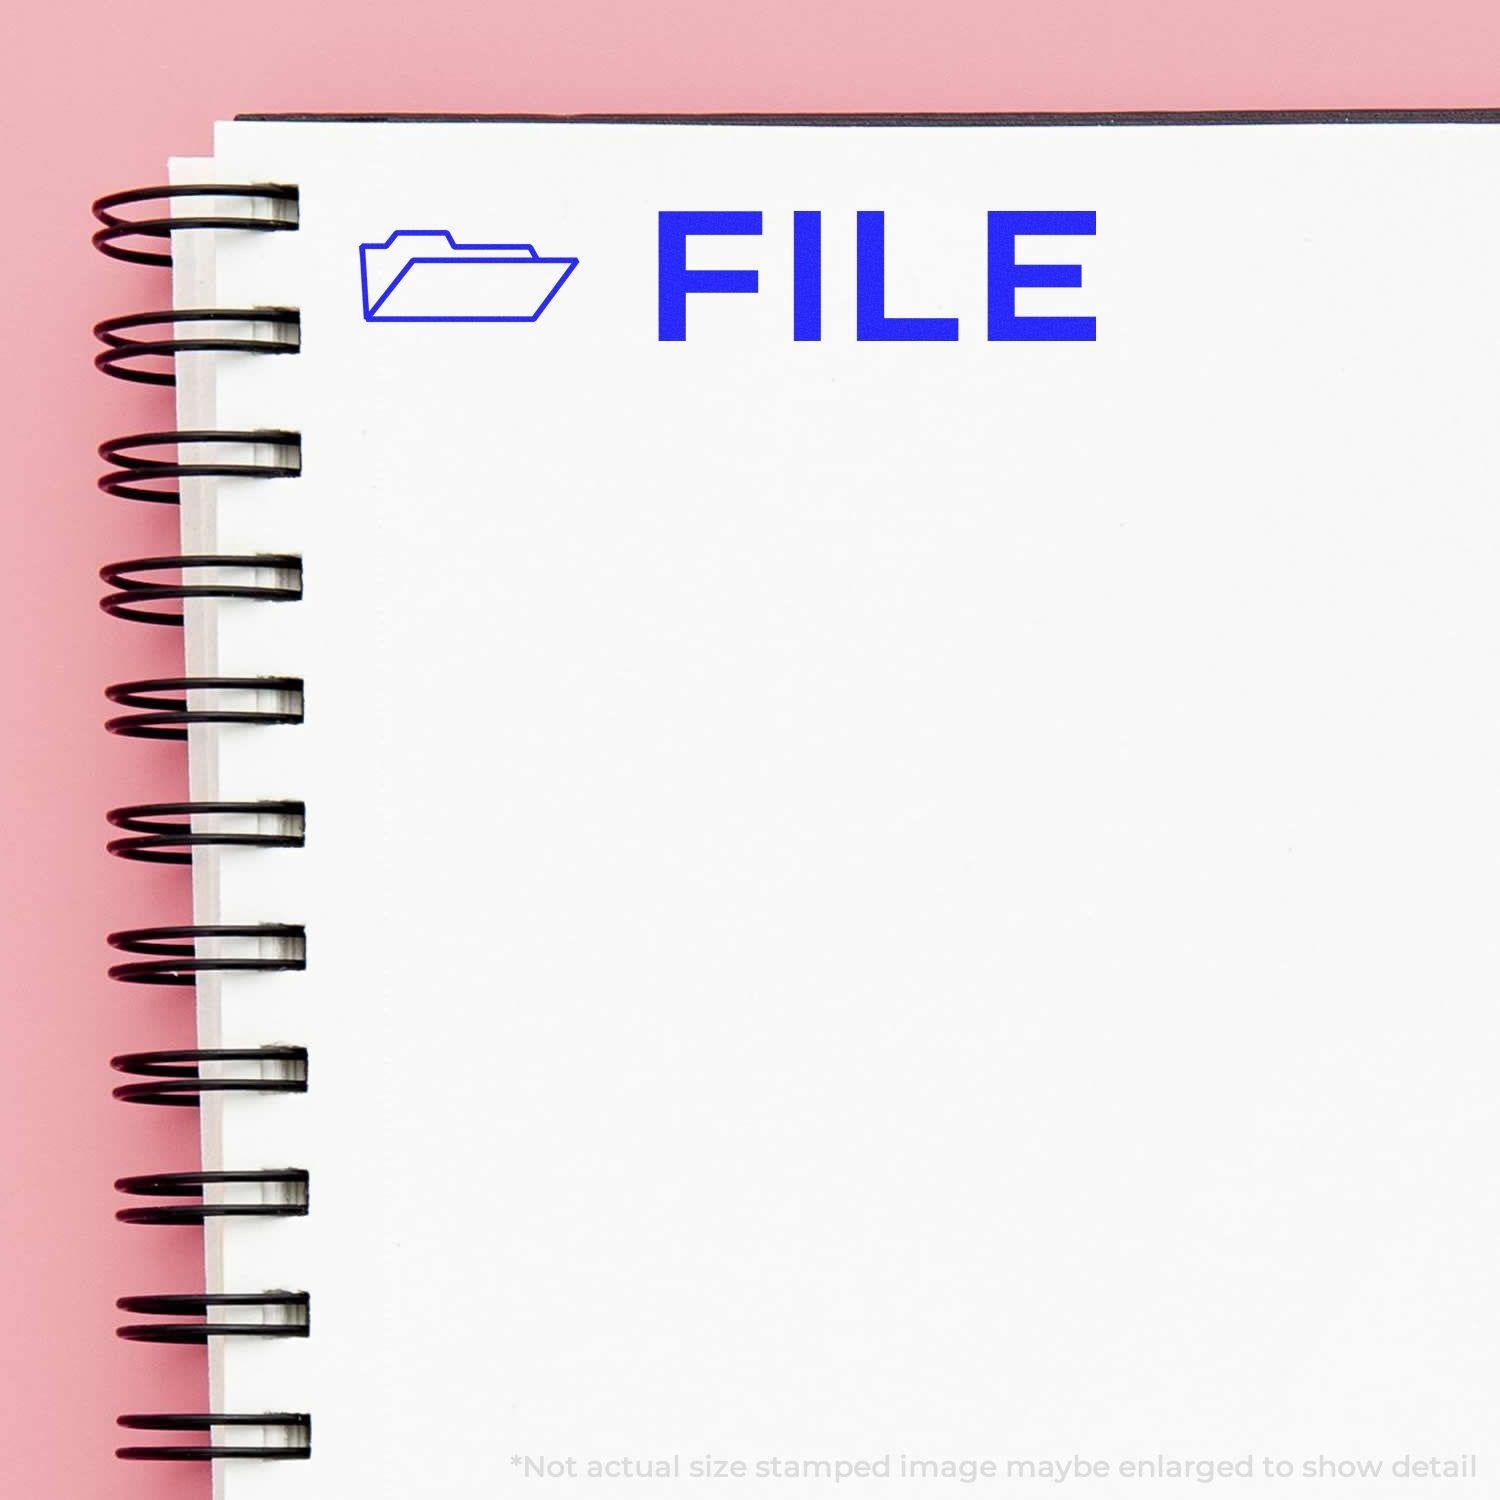 A self-inking stamp with a stamped image showing how the text "FILE" in a large bold font and a small icon of a file folder on the left side is displayed after stamping.